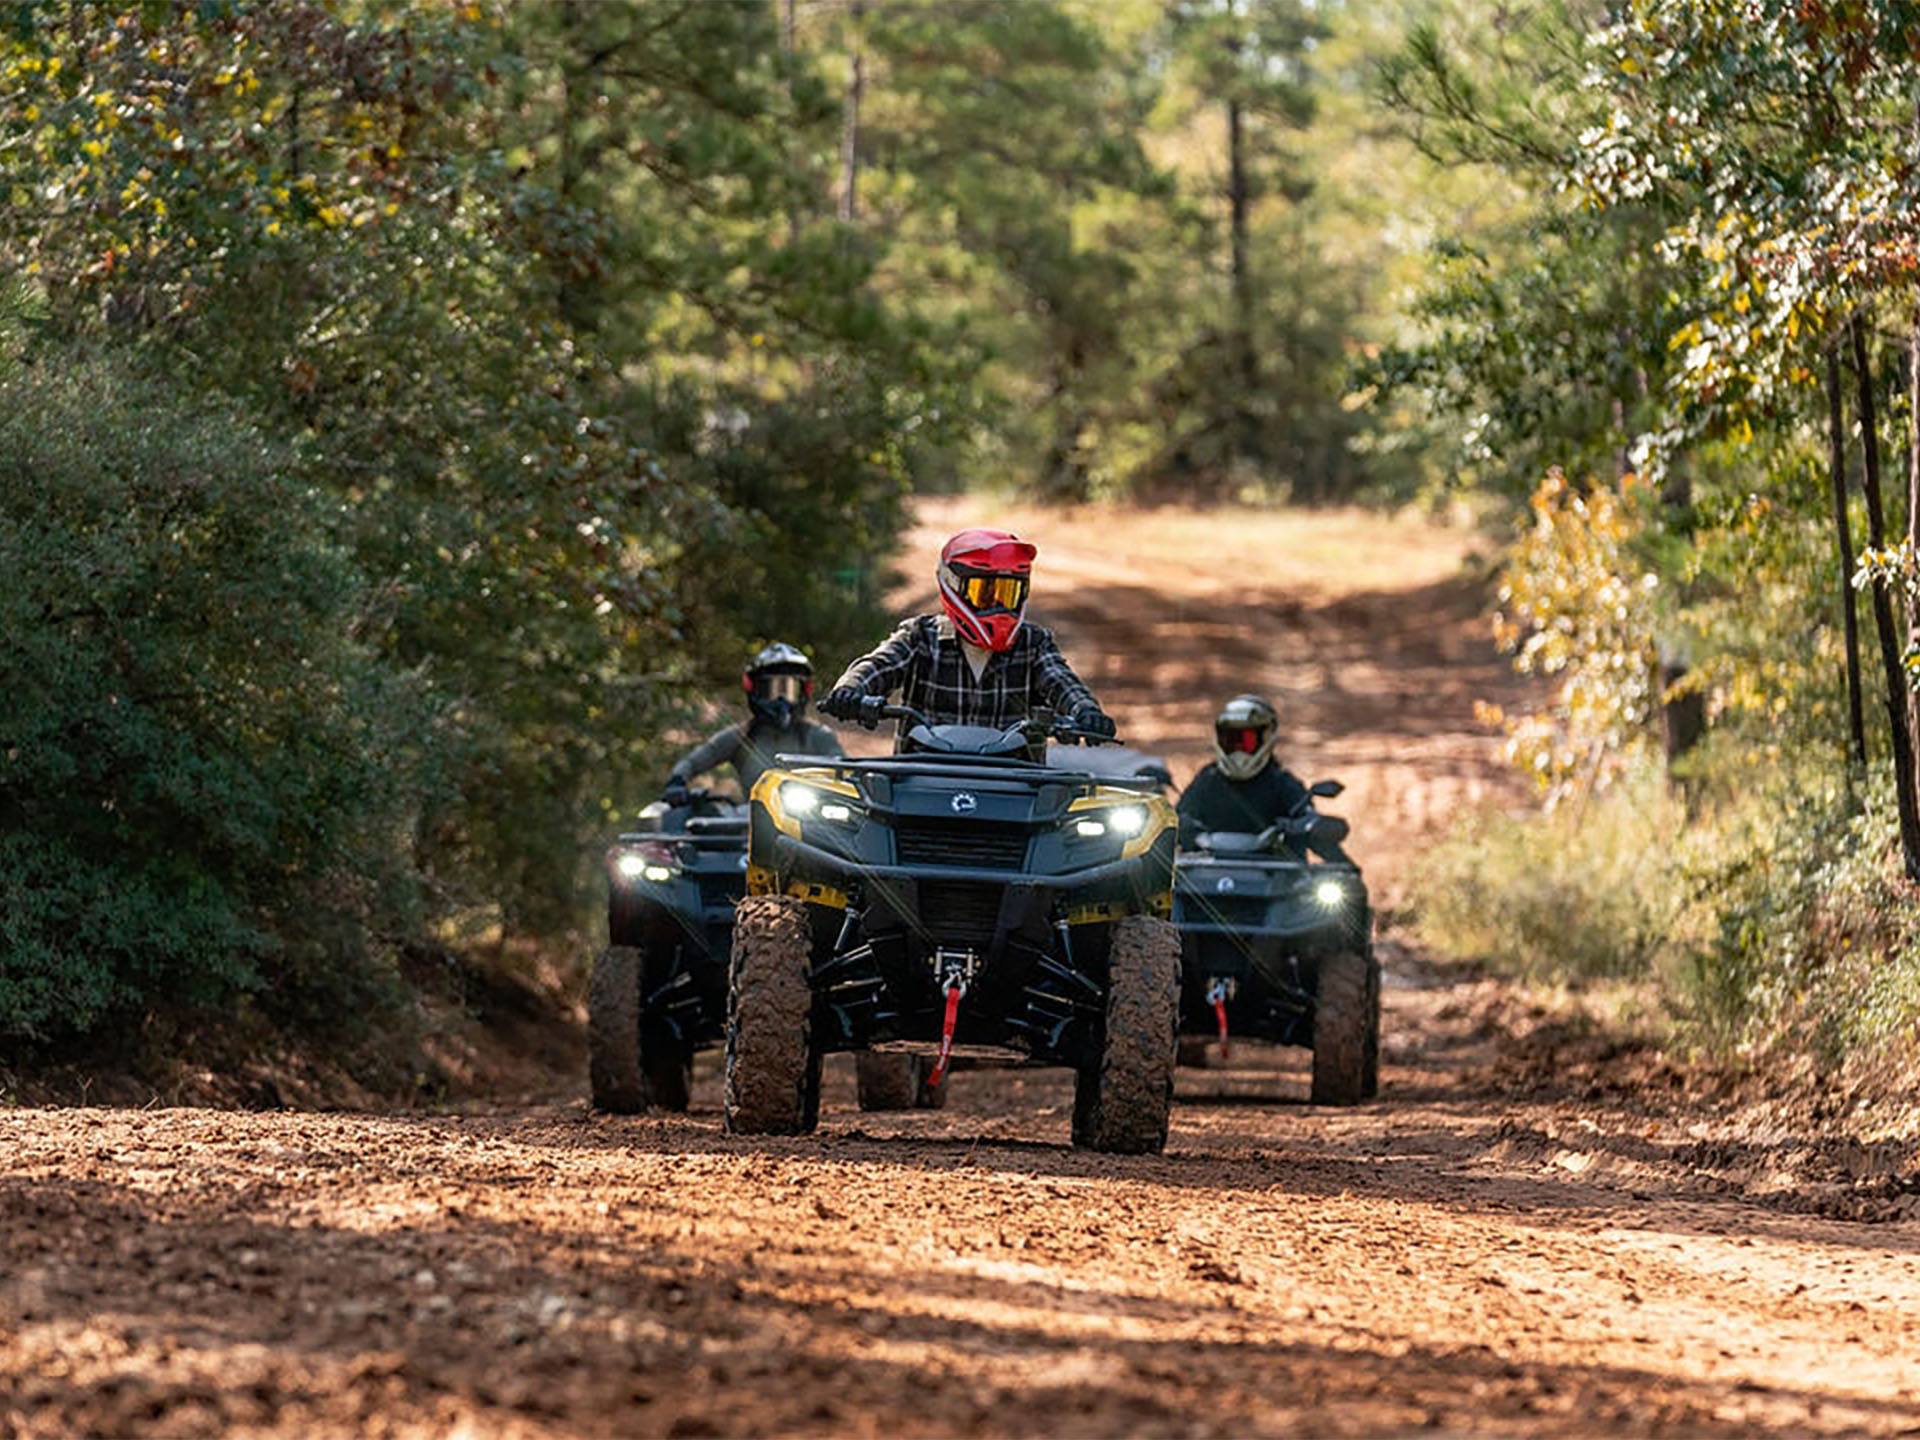 2024 Can-Am Outlander XT 700 in Leland, Mississippi - Photo 2